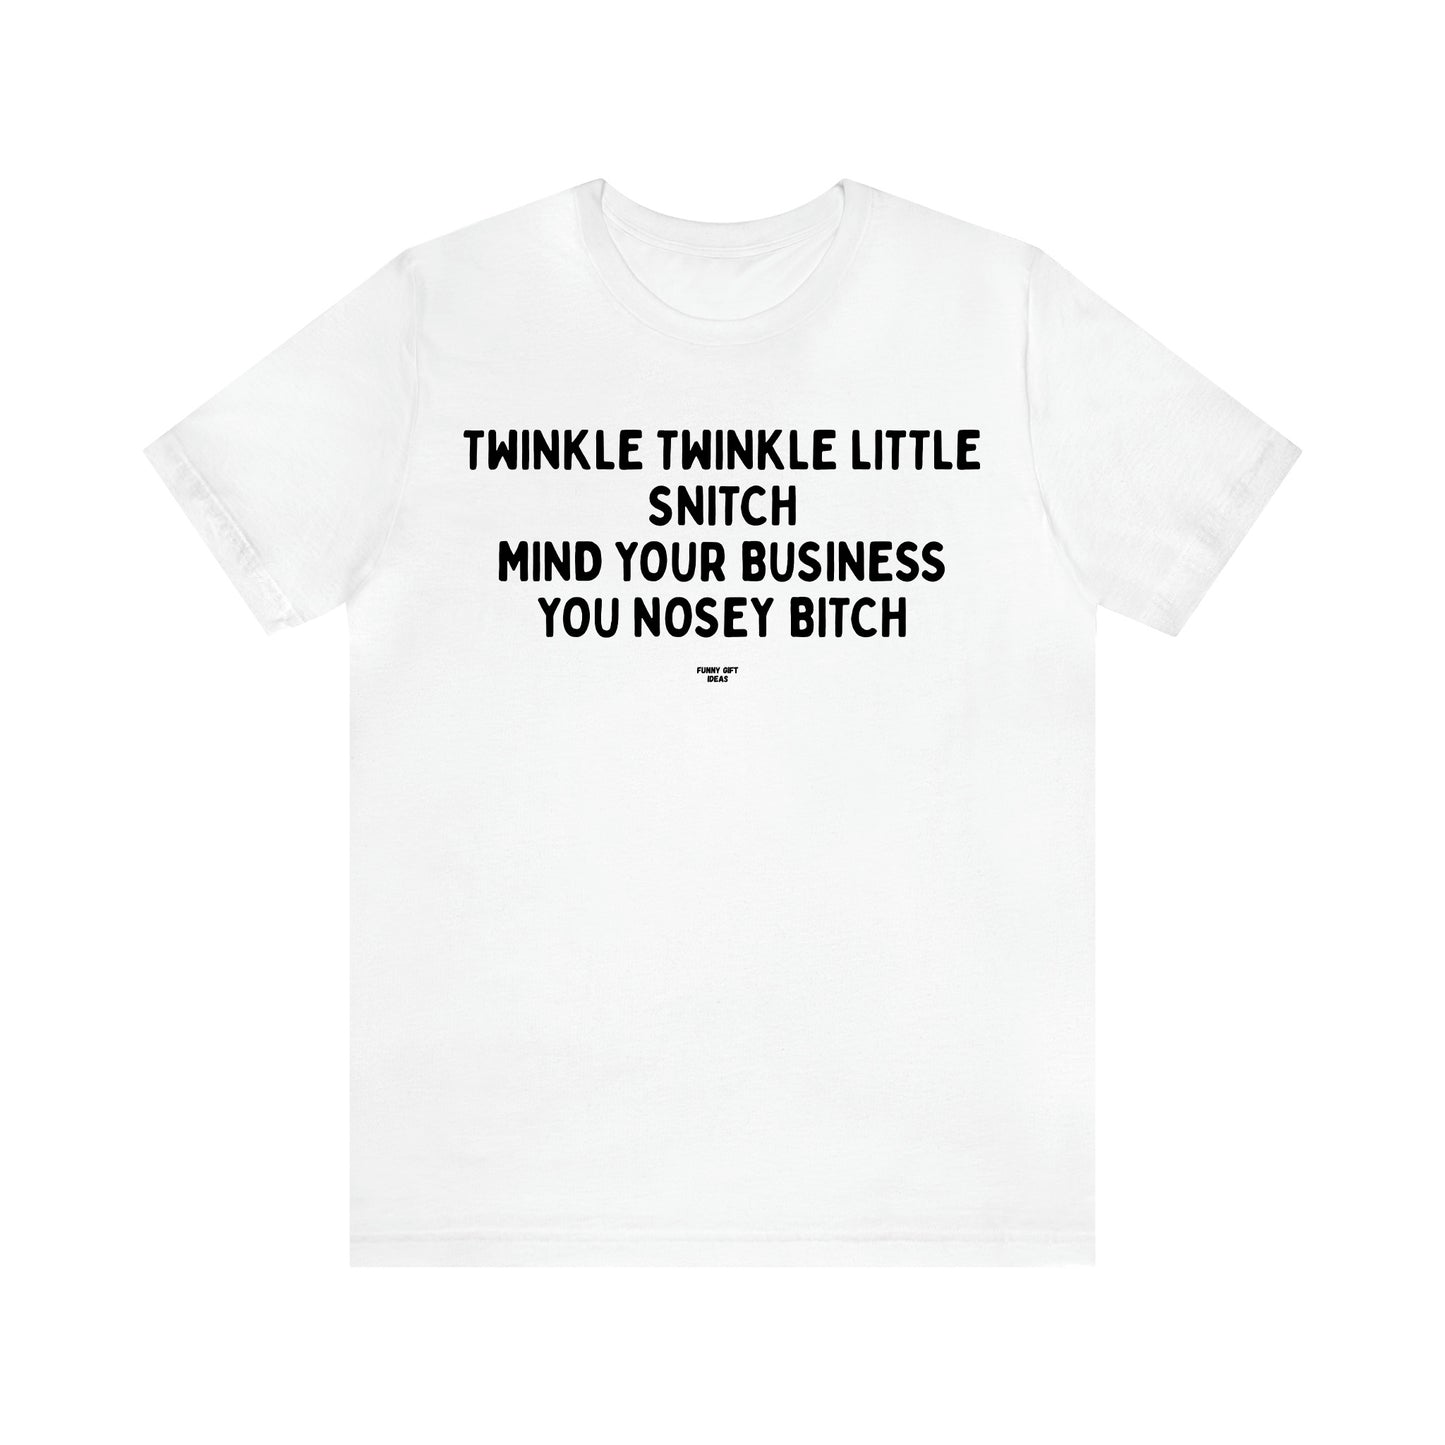 Men's T Shirts Twinkle Twinkle Little Snitch Mind Your Business You Nosey Bitch - Funny Gift Ideas